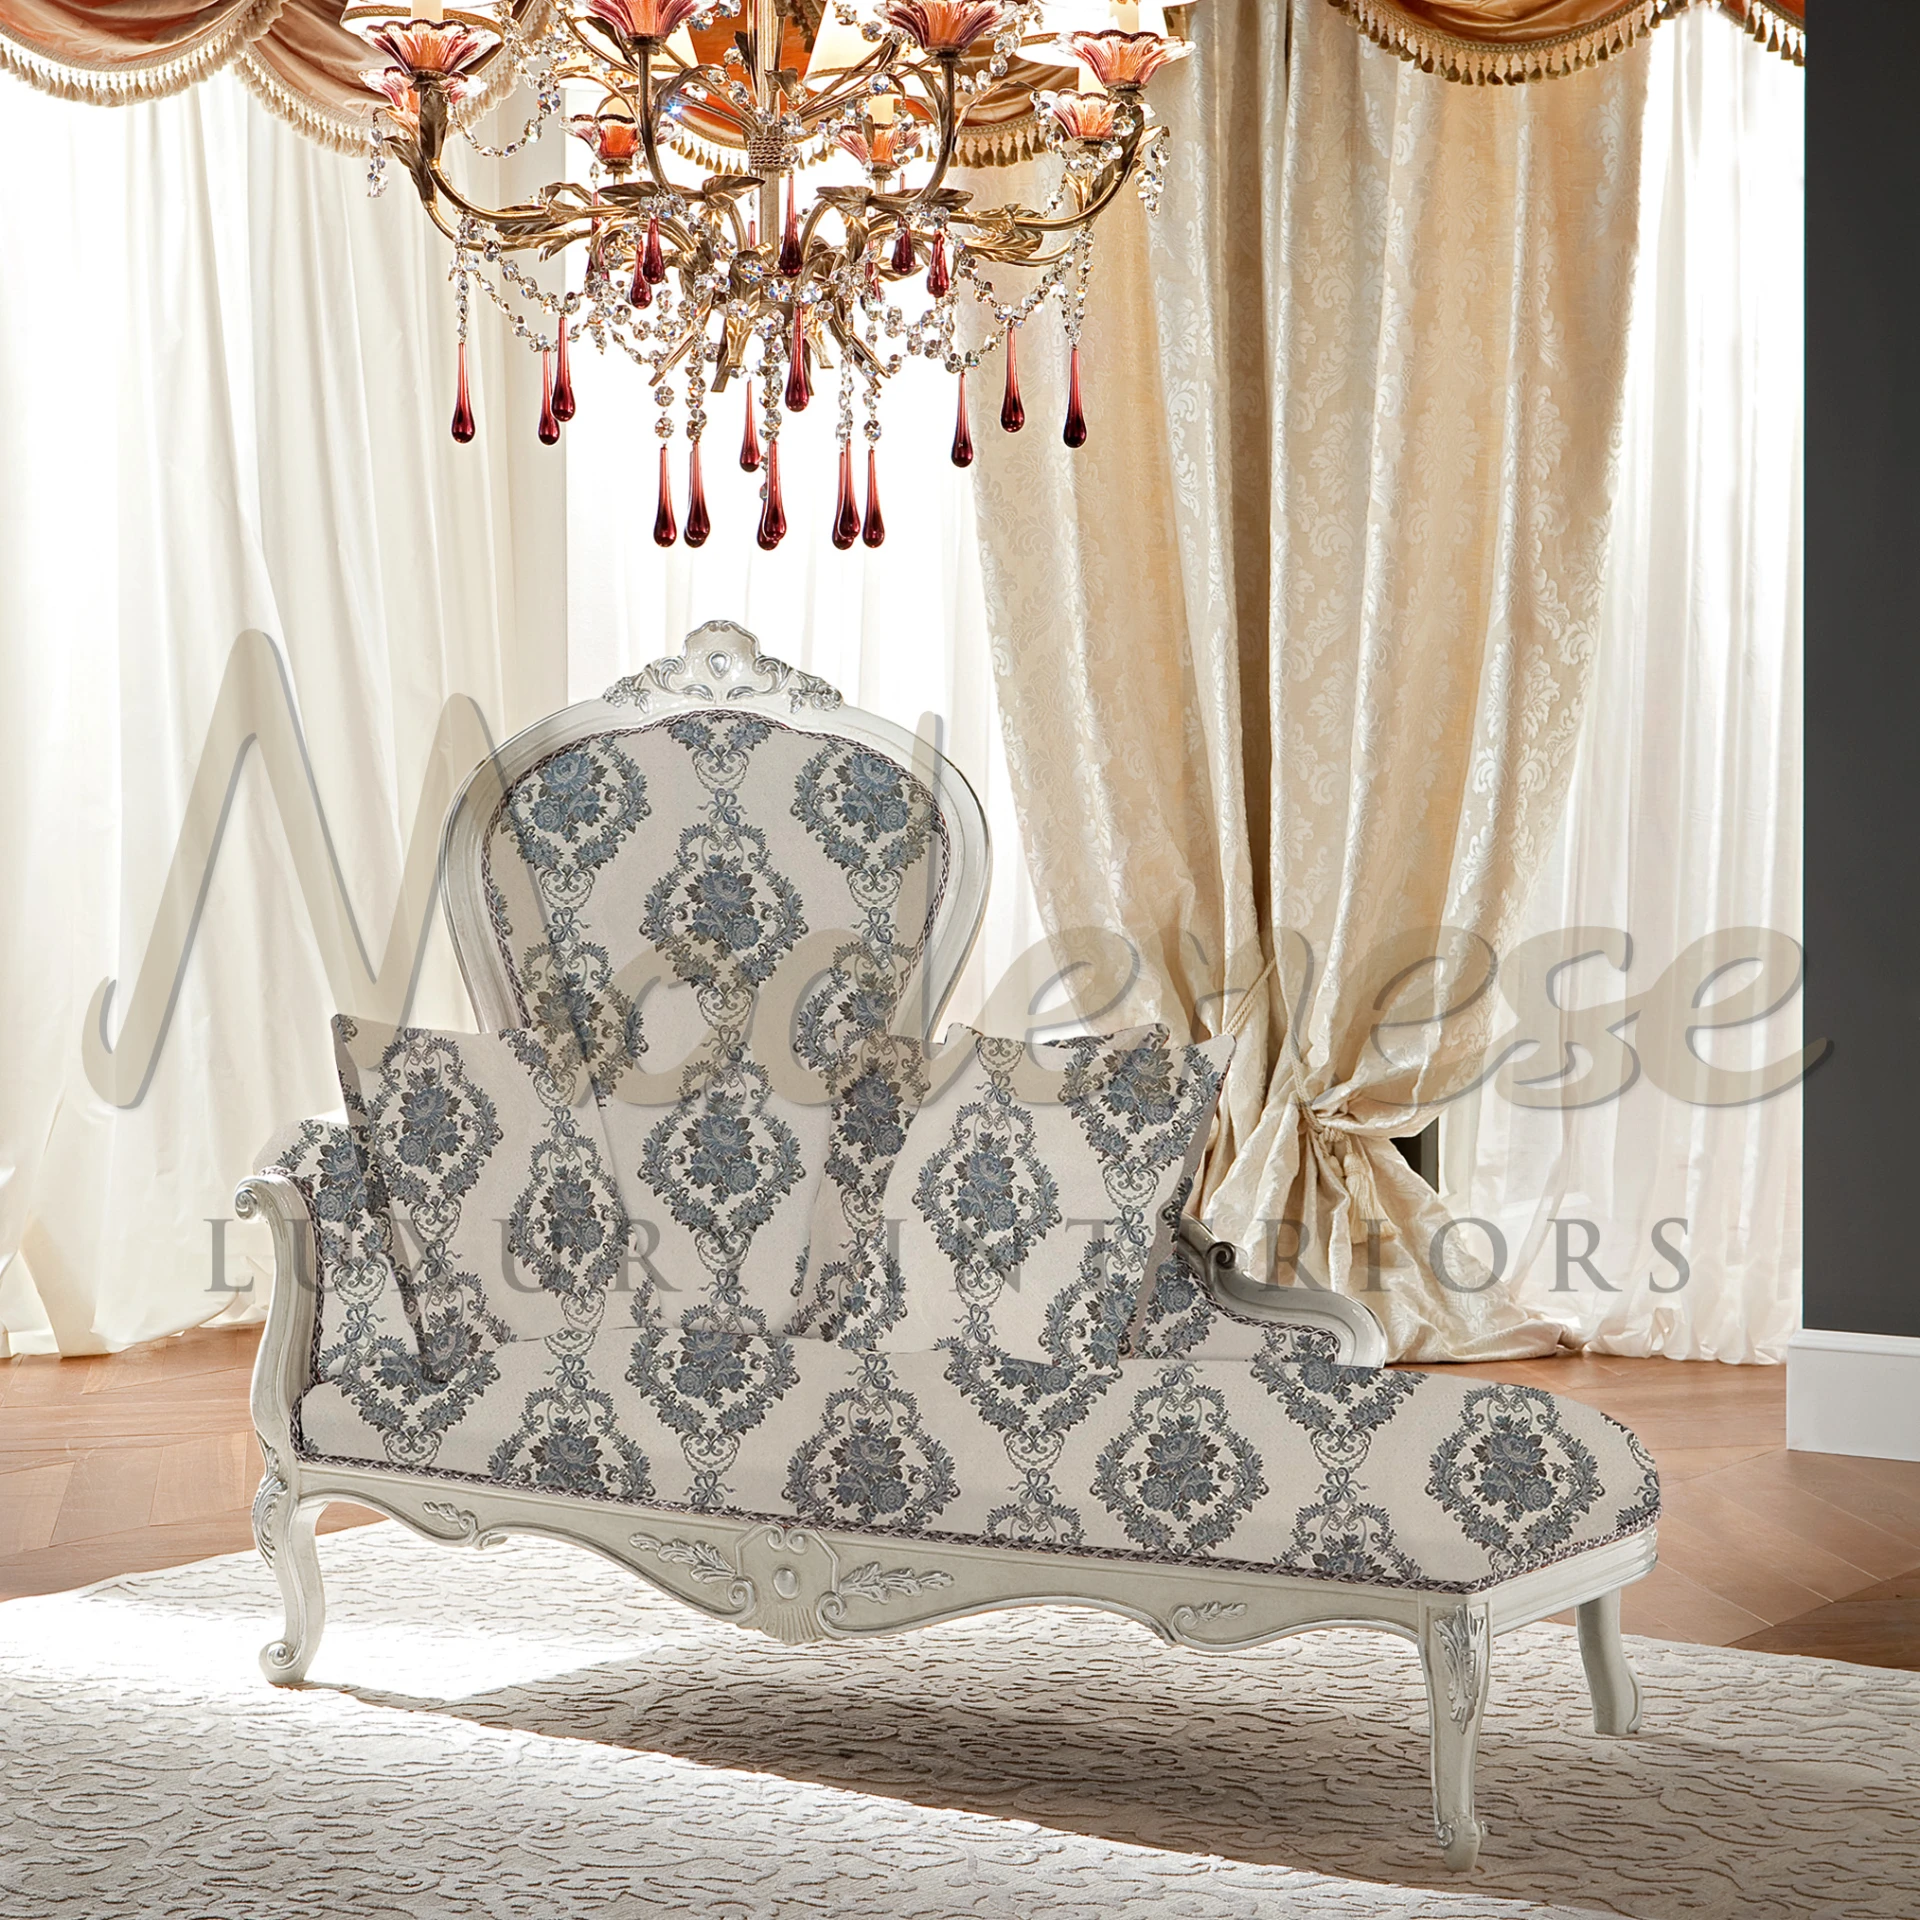 Classic cream-colored dormeuse with decorative blue and grey patterned upholstery and ornate wooden frame detailing, radiating vintage elegance.